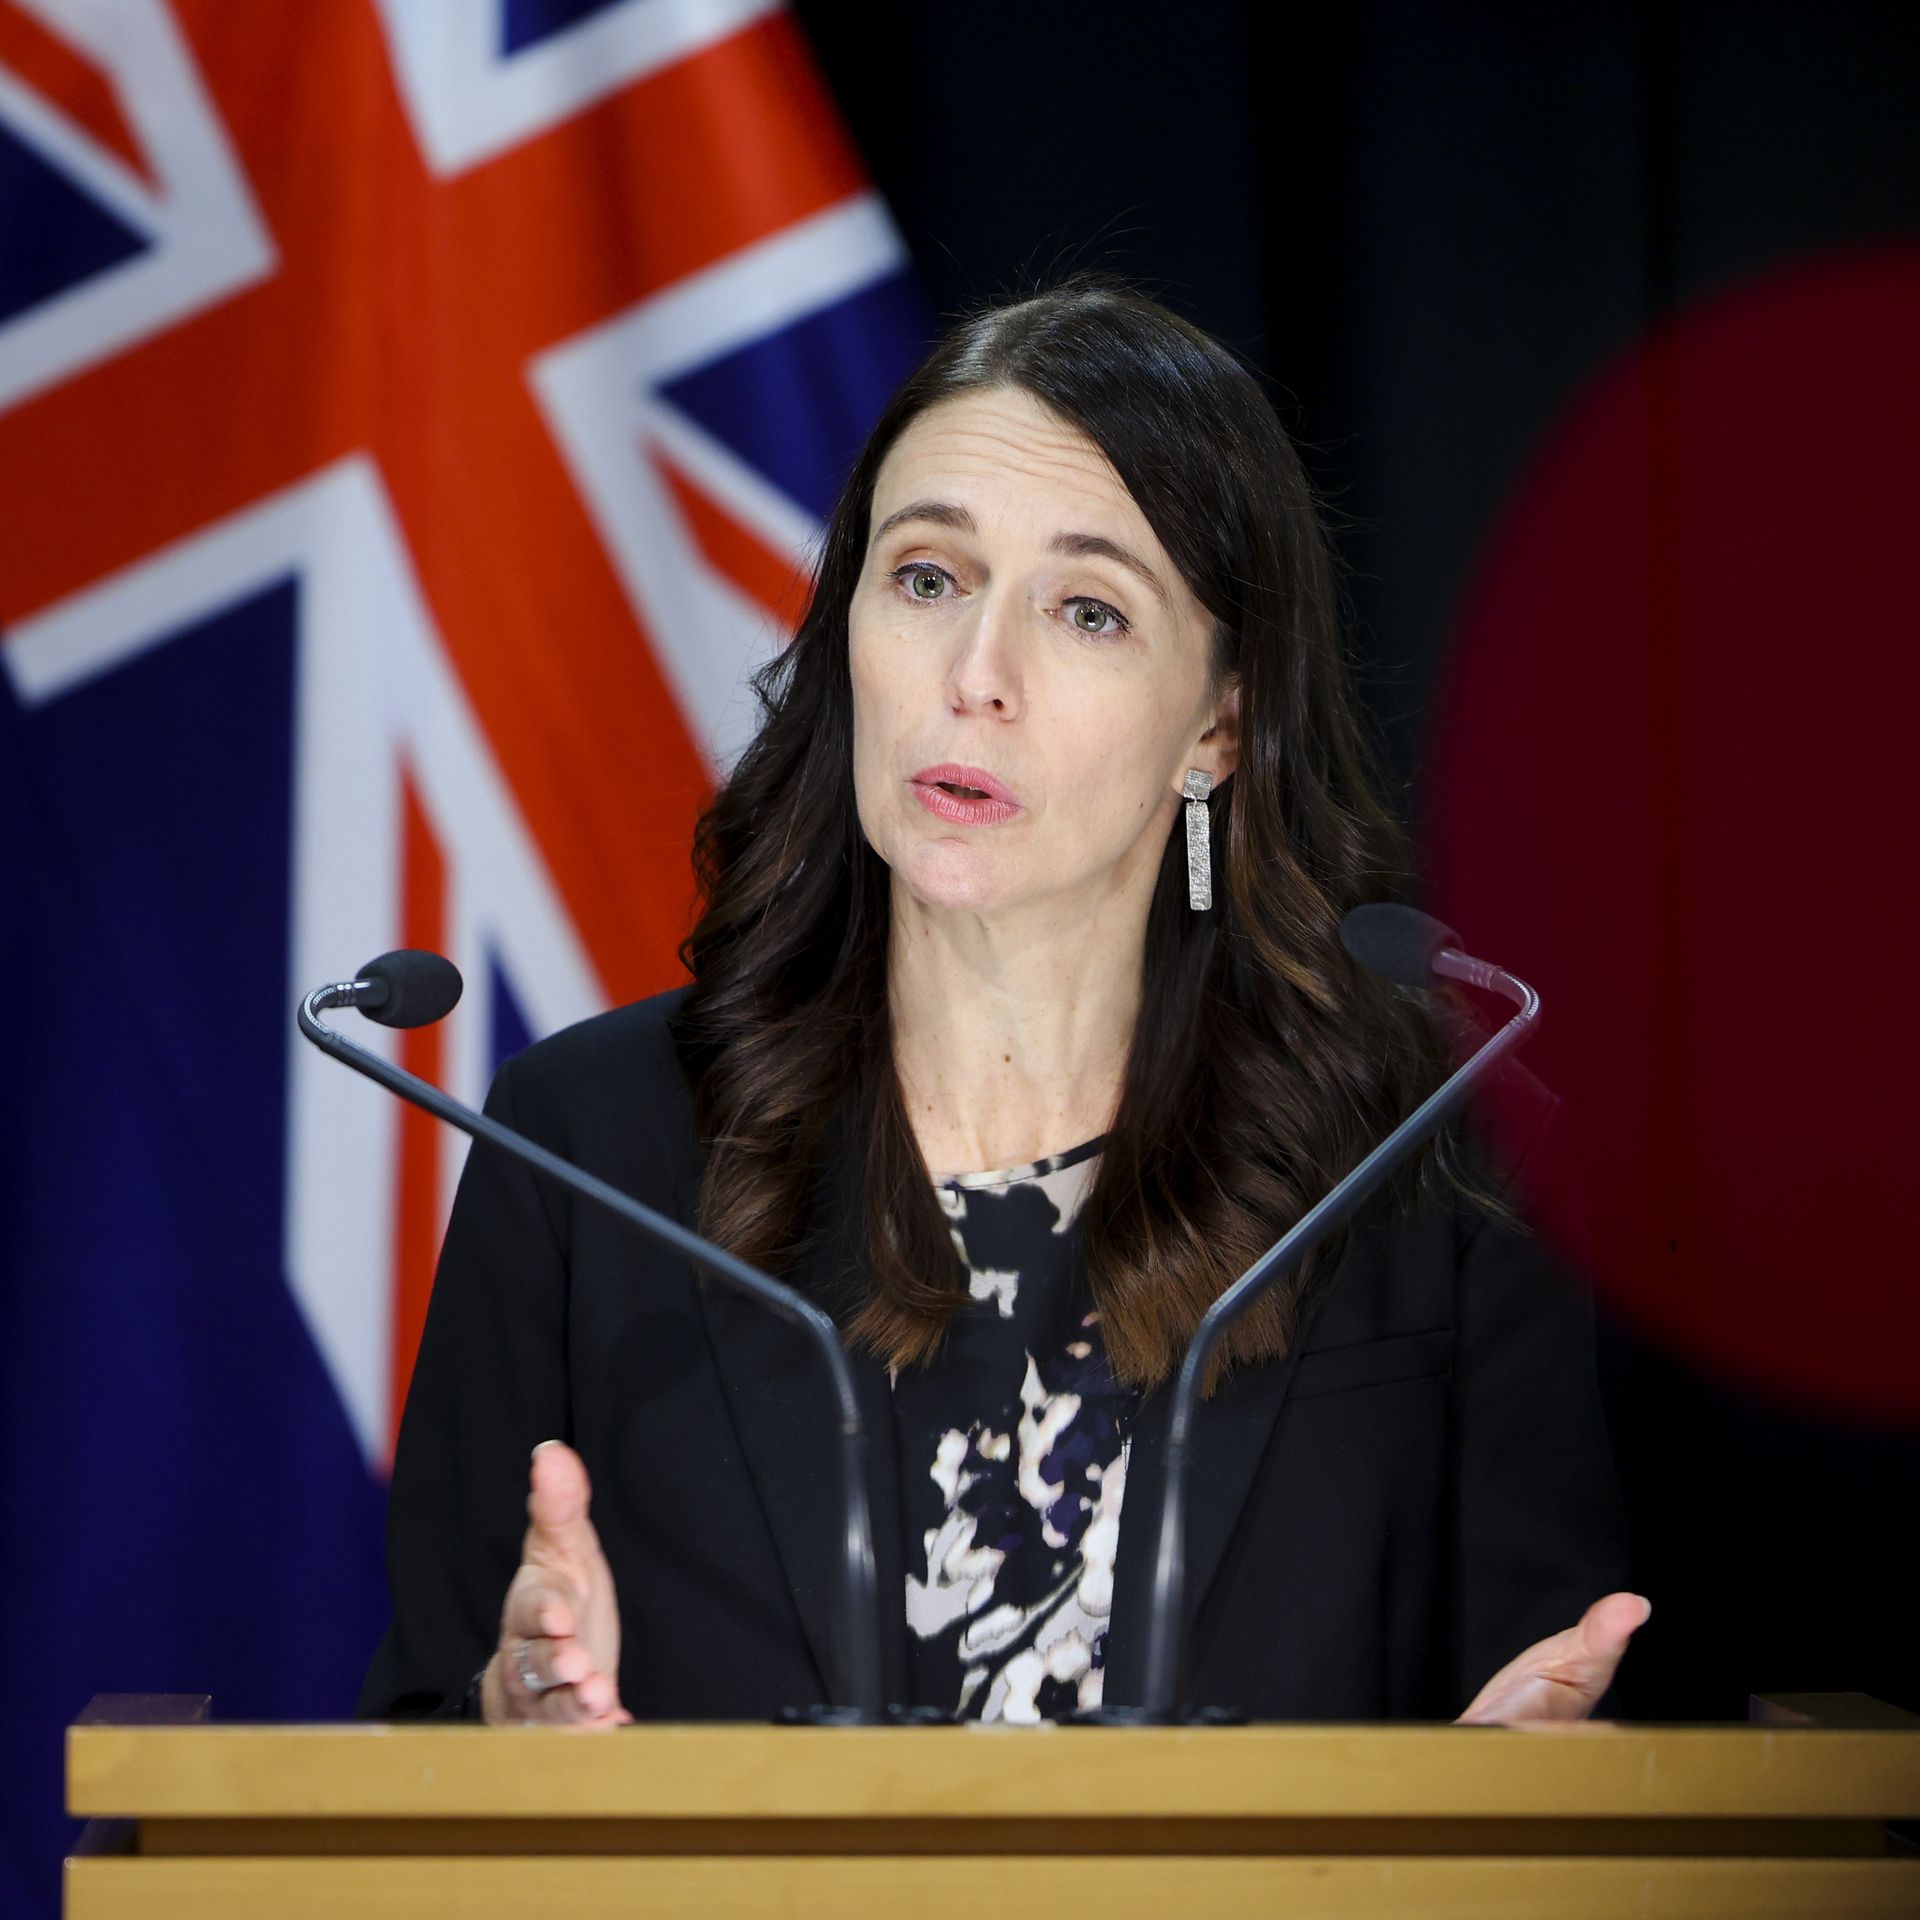 Prime Minister Jacinda Ardern speaks during a post cabinet press conference at Parliament on May 23, 2022 in Wellington, New Zealand.